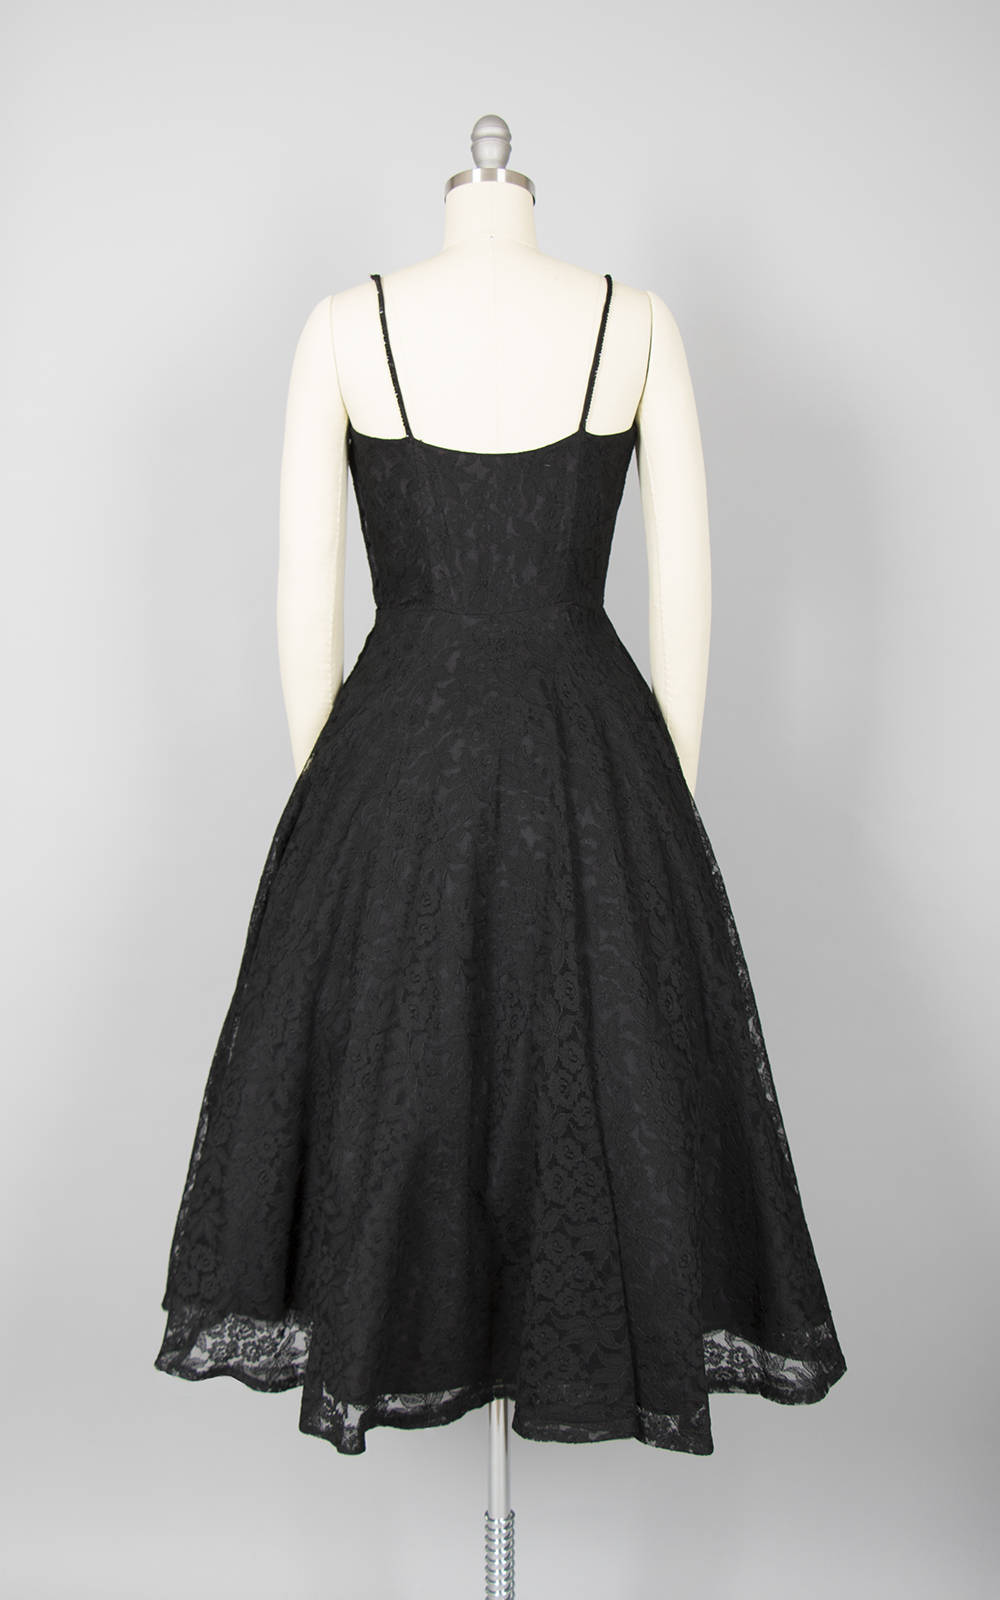 Vintage 1950s Dress | 50s Black Lace Party Dress Sequin Spaghetti Strap Full Skirt Fit and Flare (xs/small)